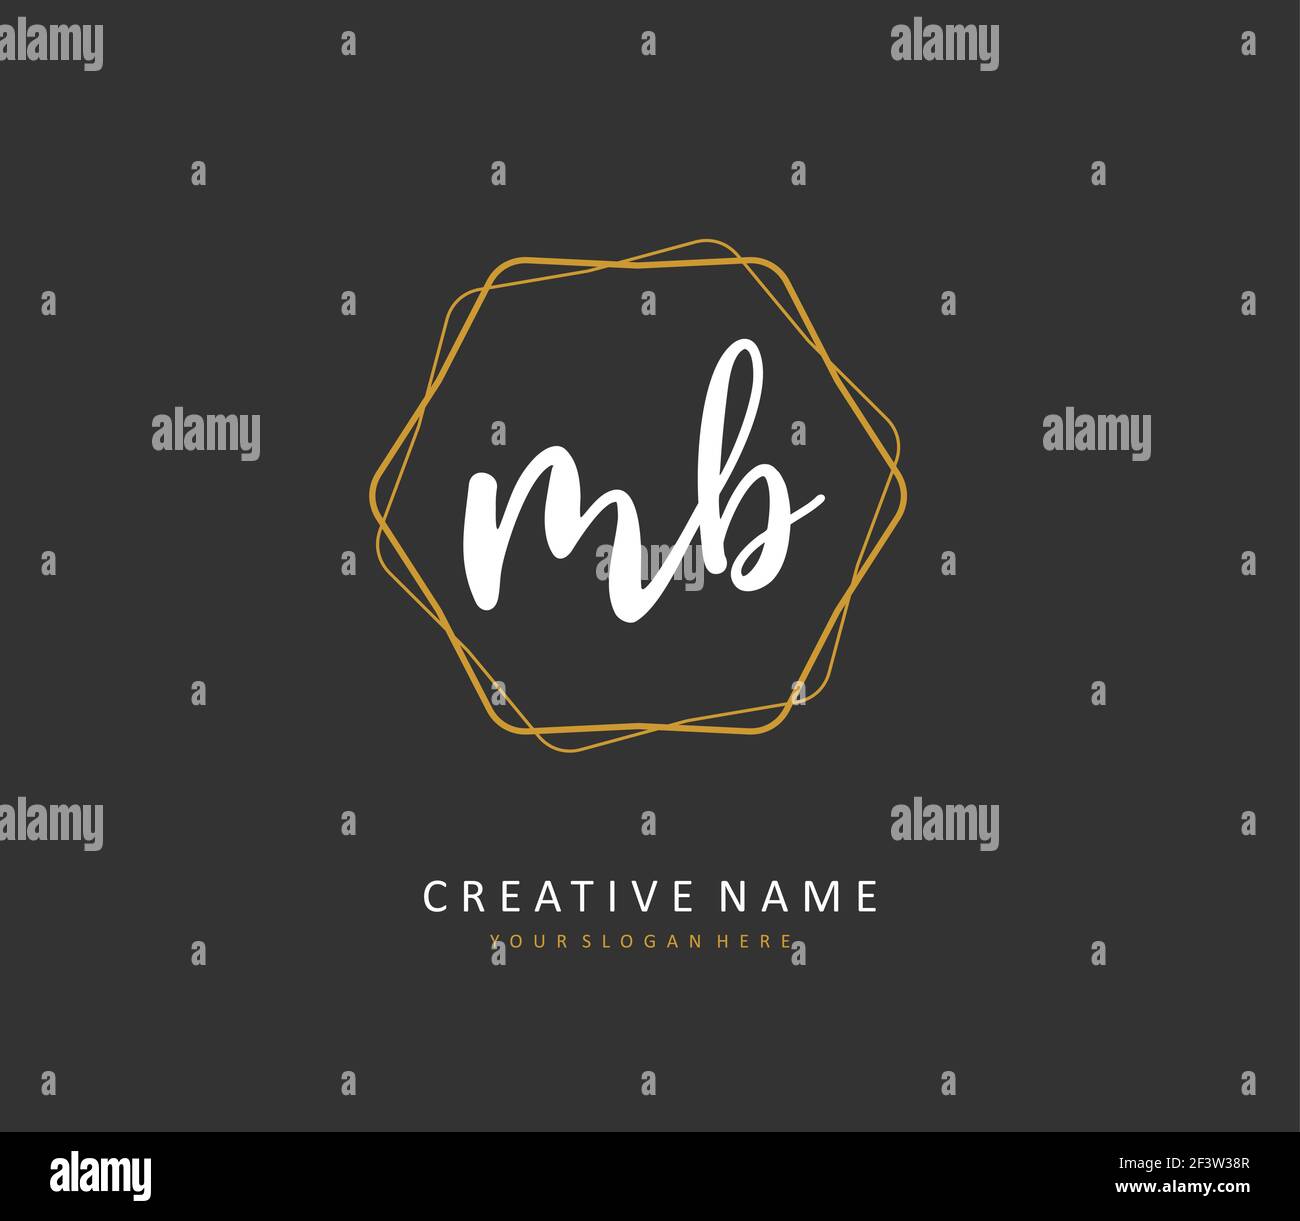 M B MB Initial letter handwriting and signature logo. A concept handwriting initial logo with template element. Stock Vector